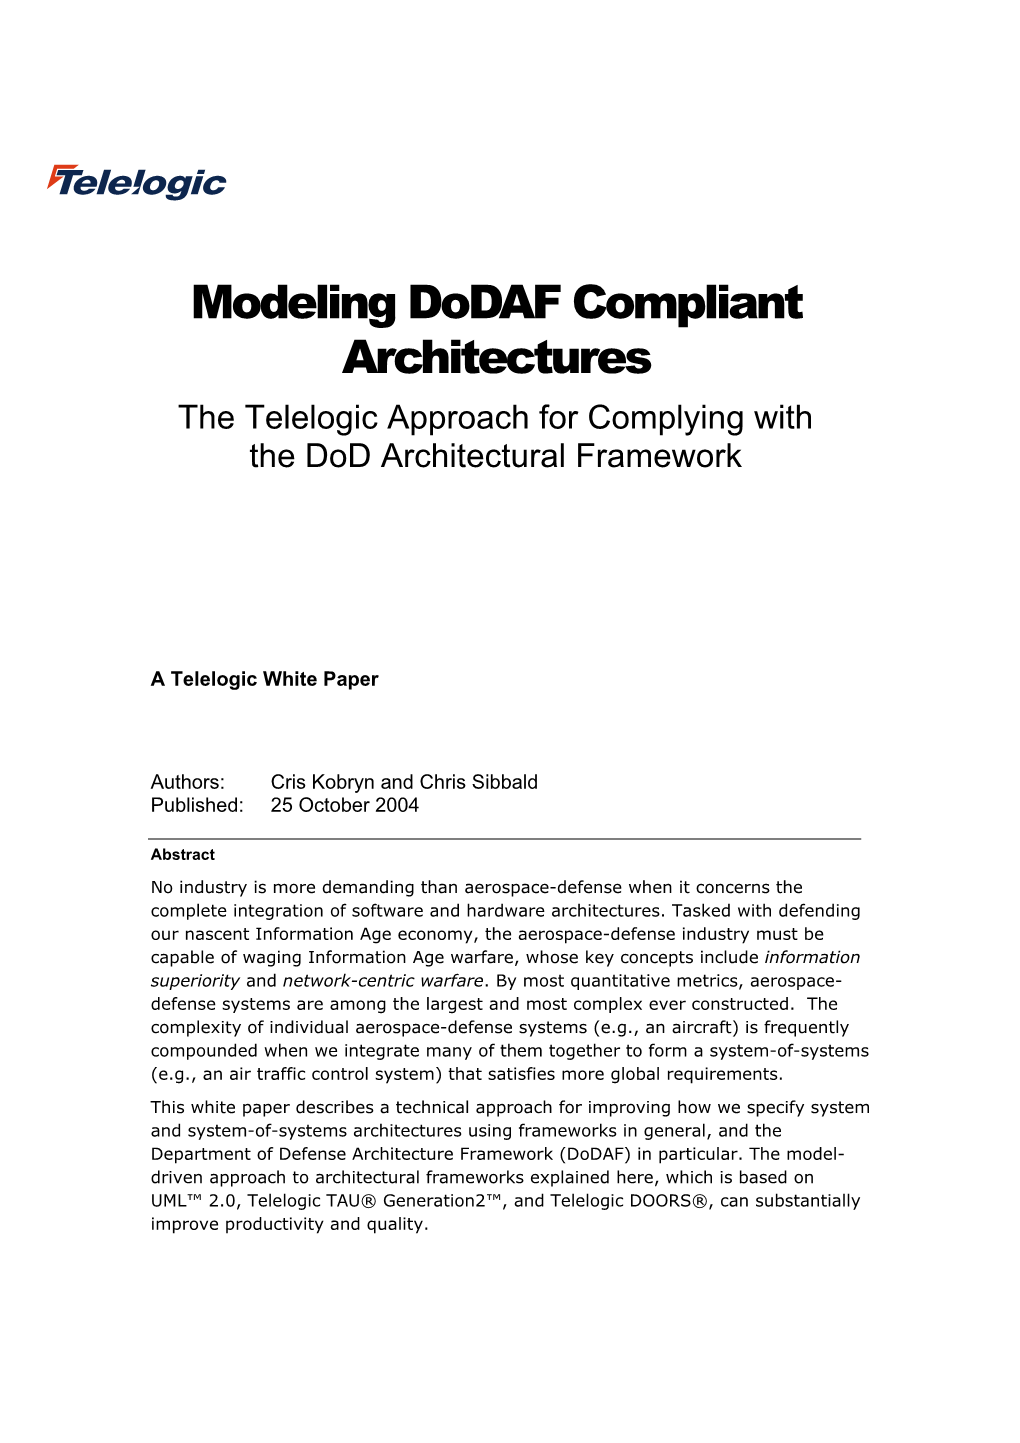 Modeling Dodaf Compliant Architectures the Telelogic Approach for Complying with the Dod Architectural Framework